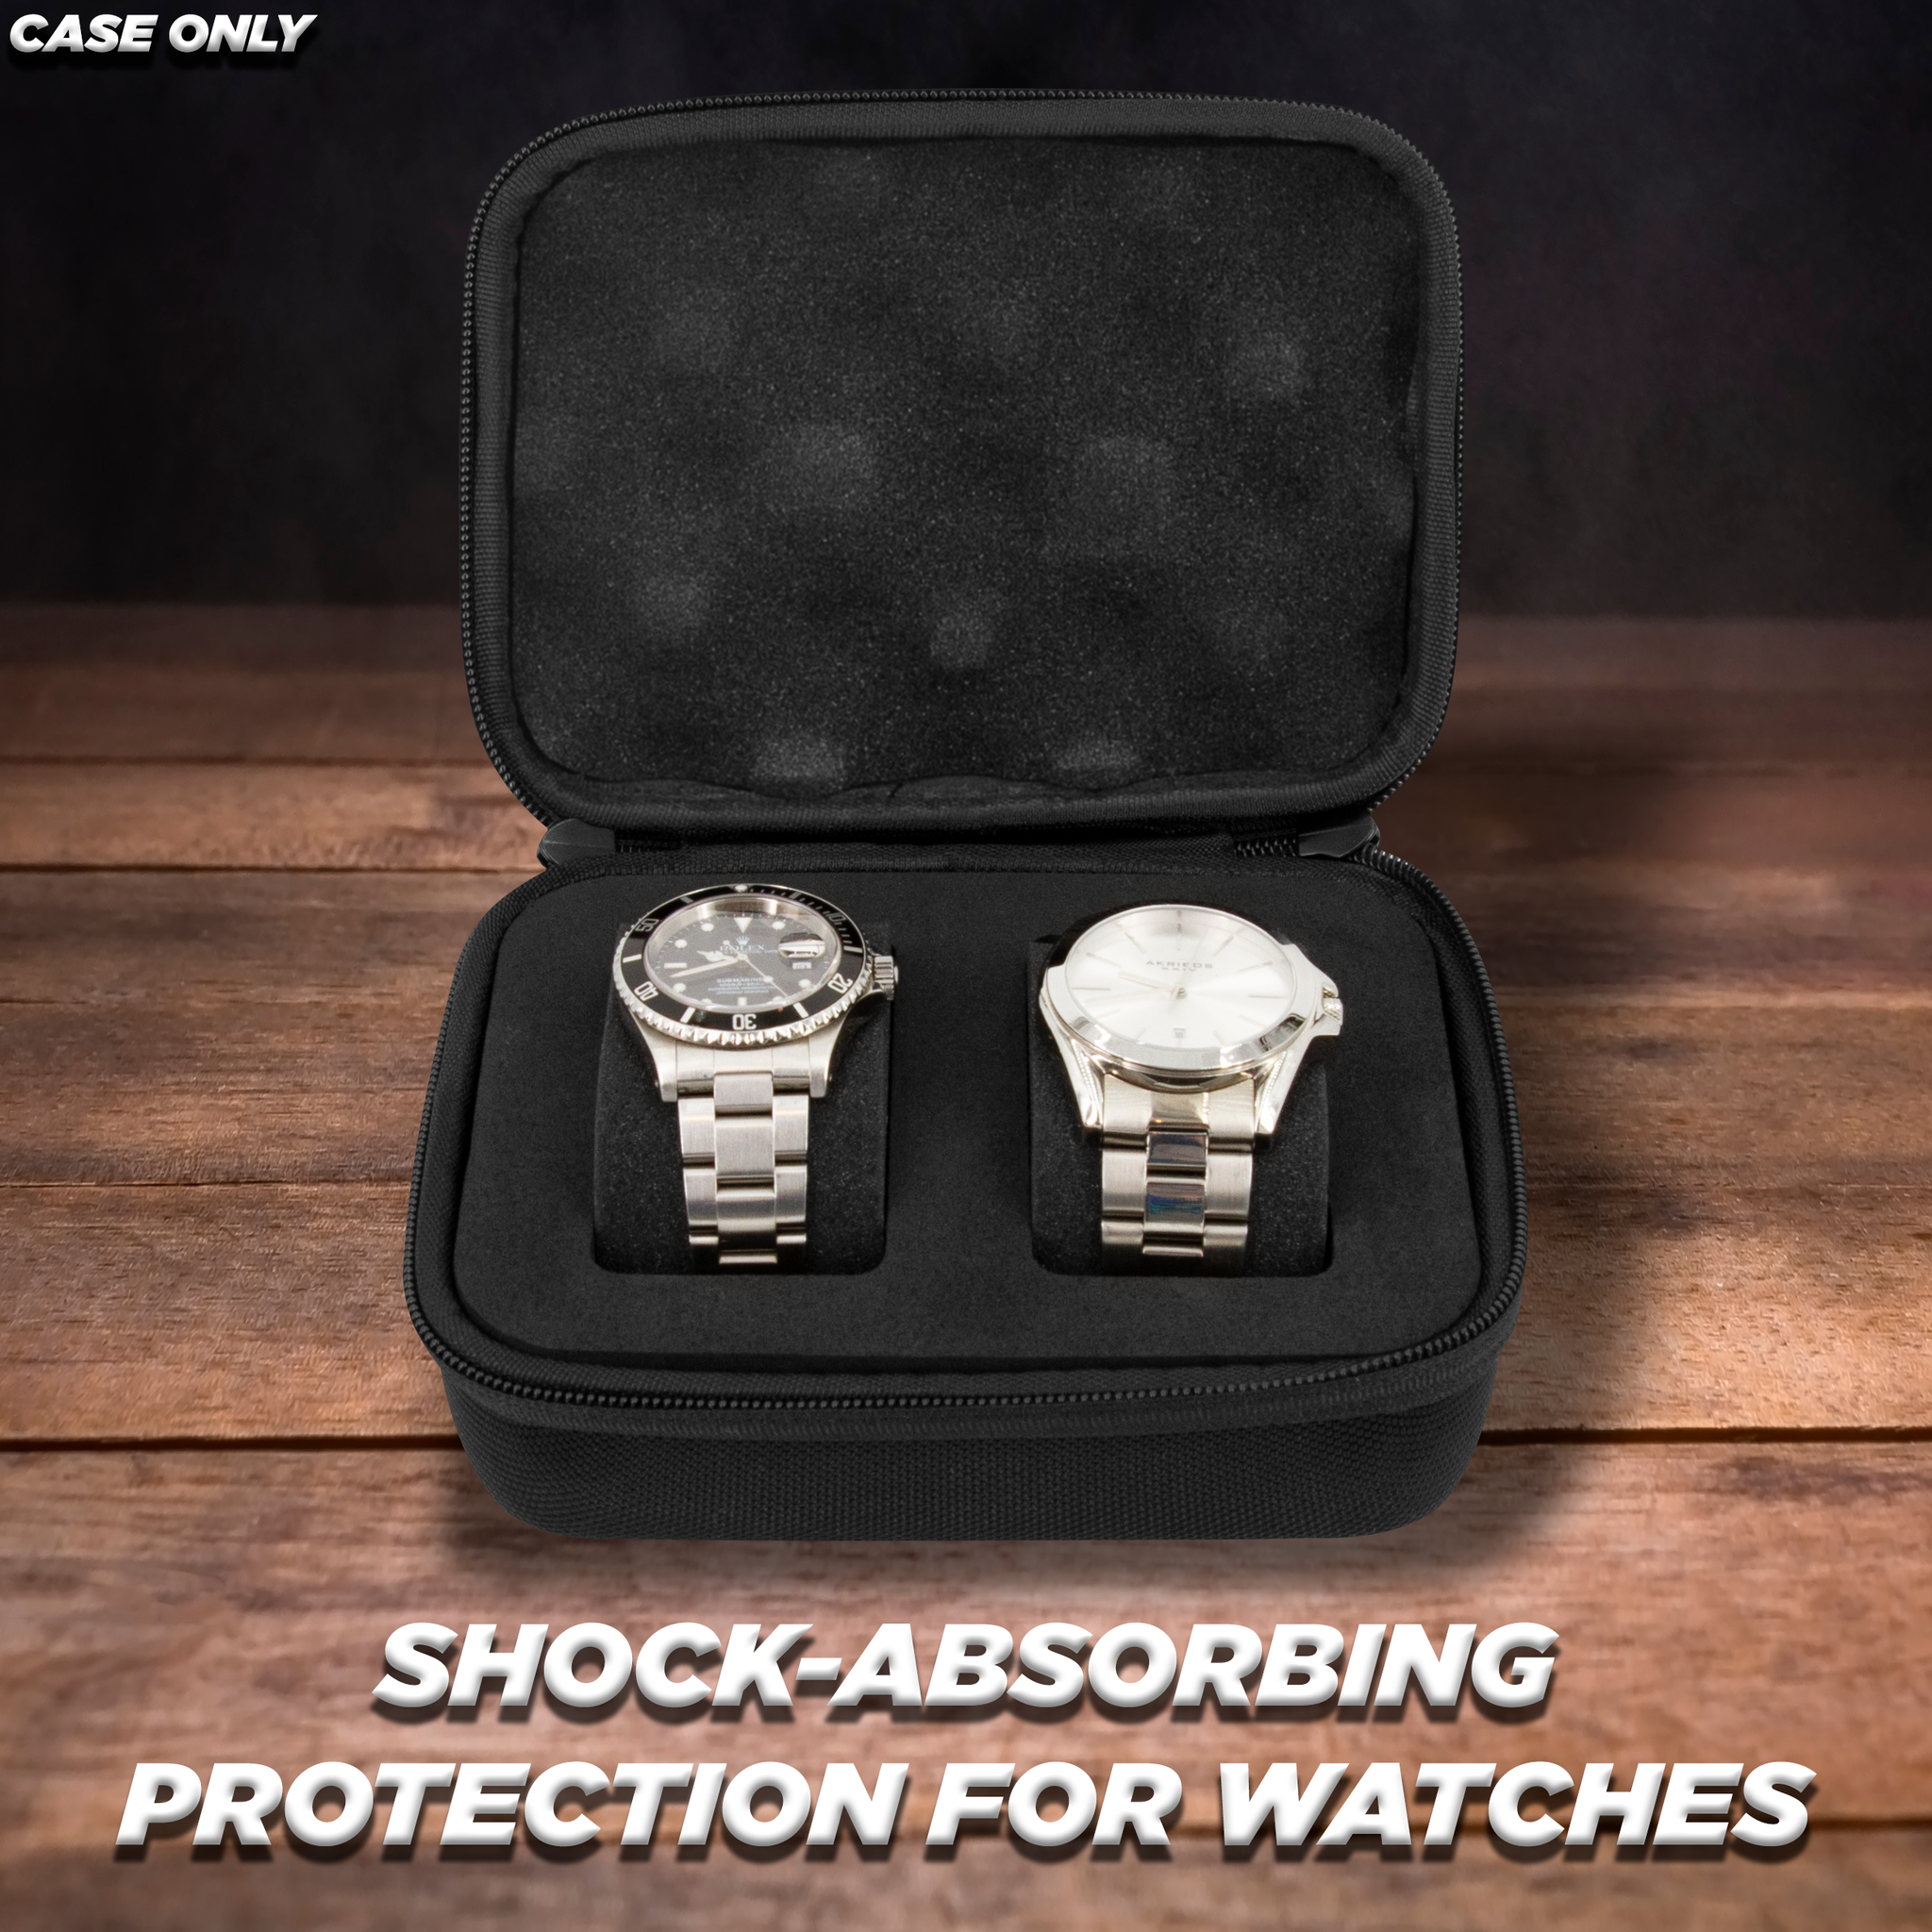 How to Properly Store and Protect Your Watch, According to Experts